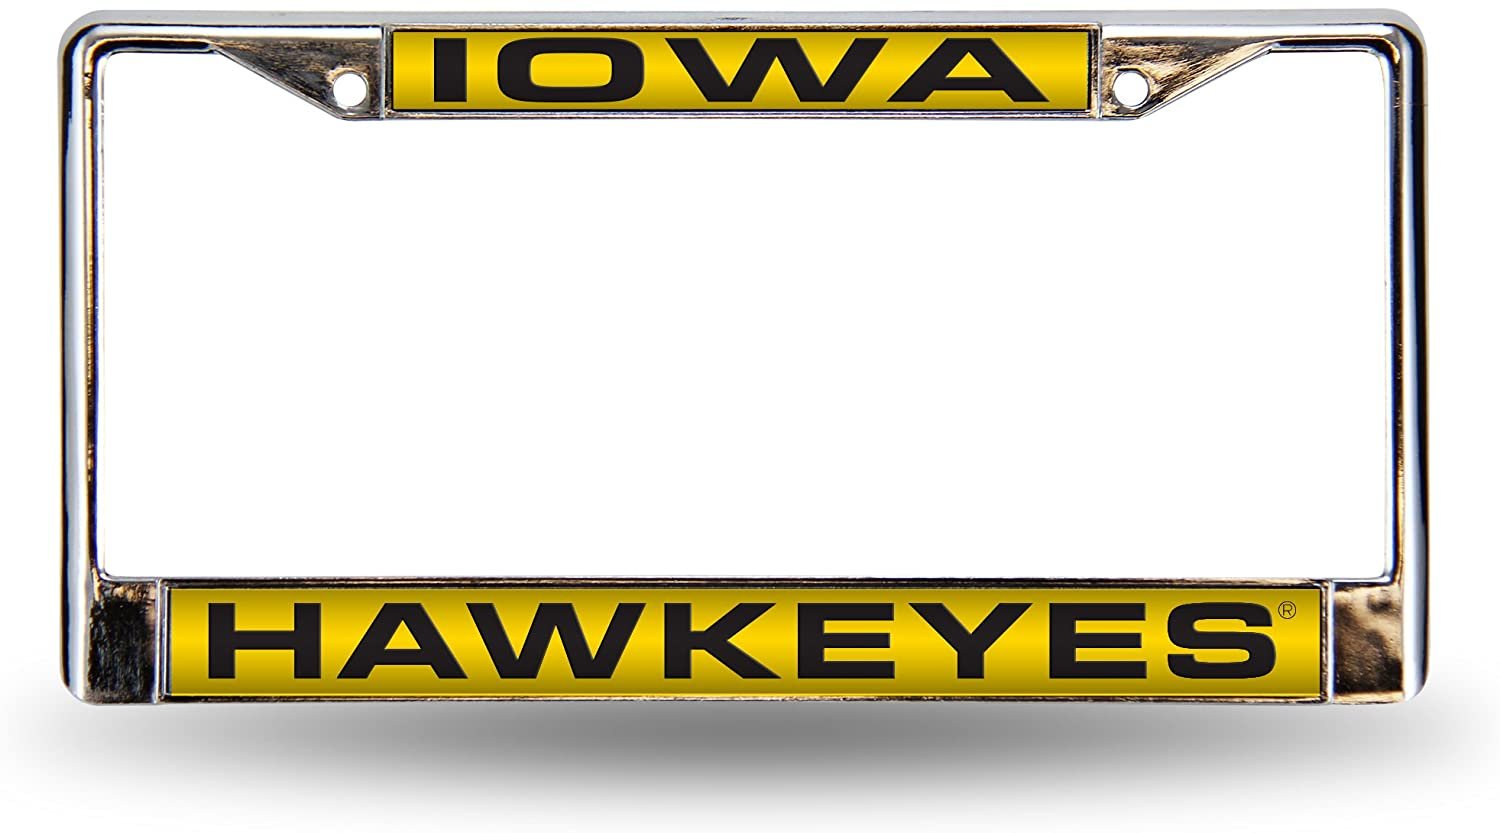 University of Iowa Hawkeyes Metal License Plate Frame Chrome Tag Cover, Laser Acrylic Mirrored Inserts, 12x6 Inch